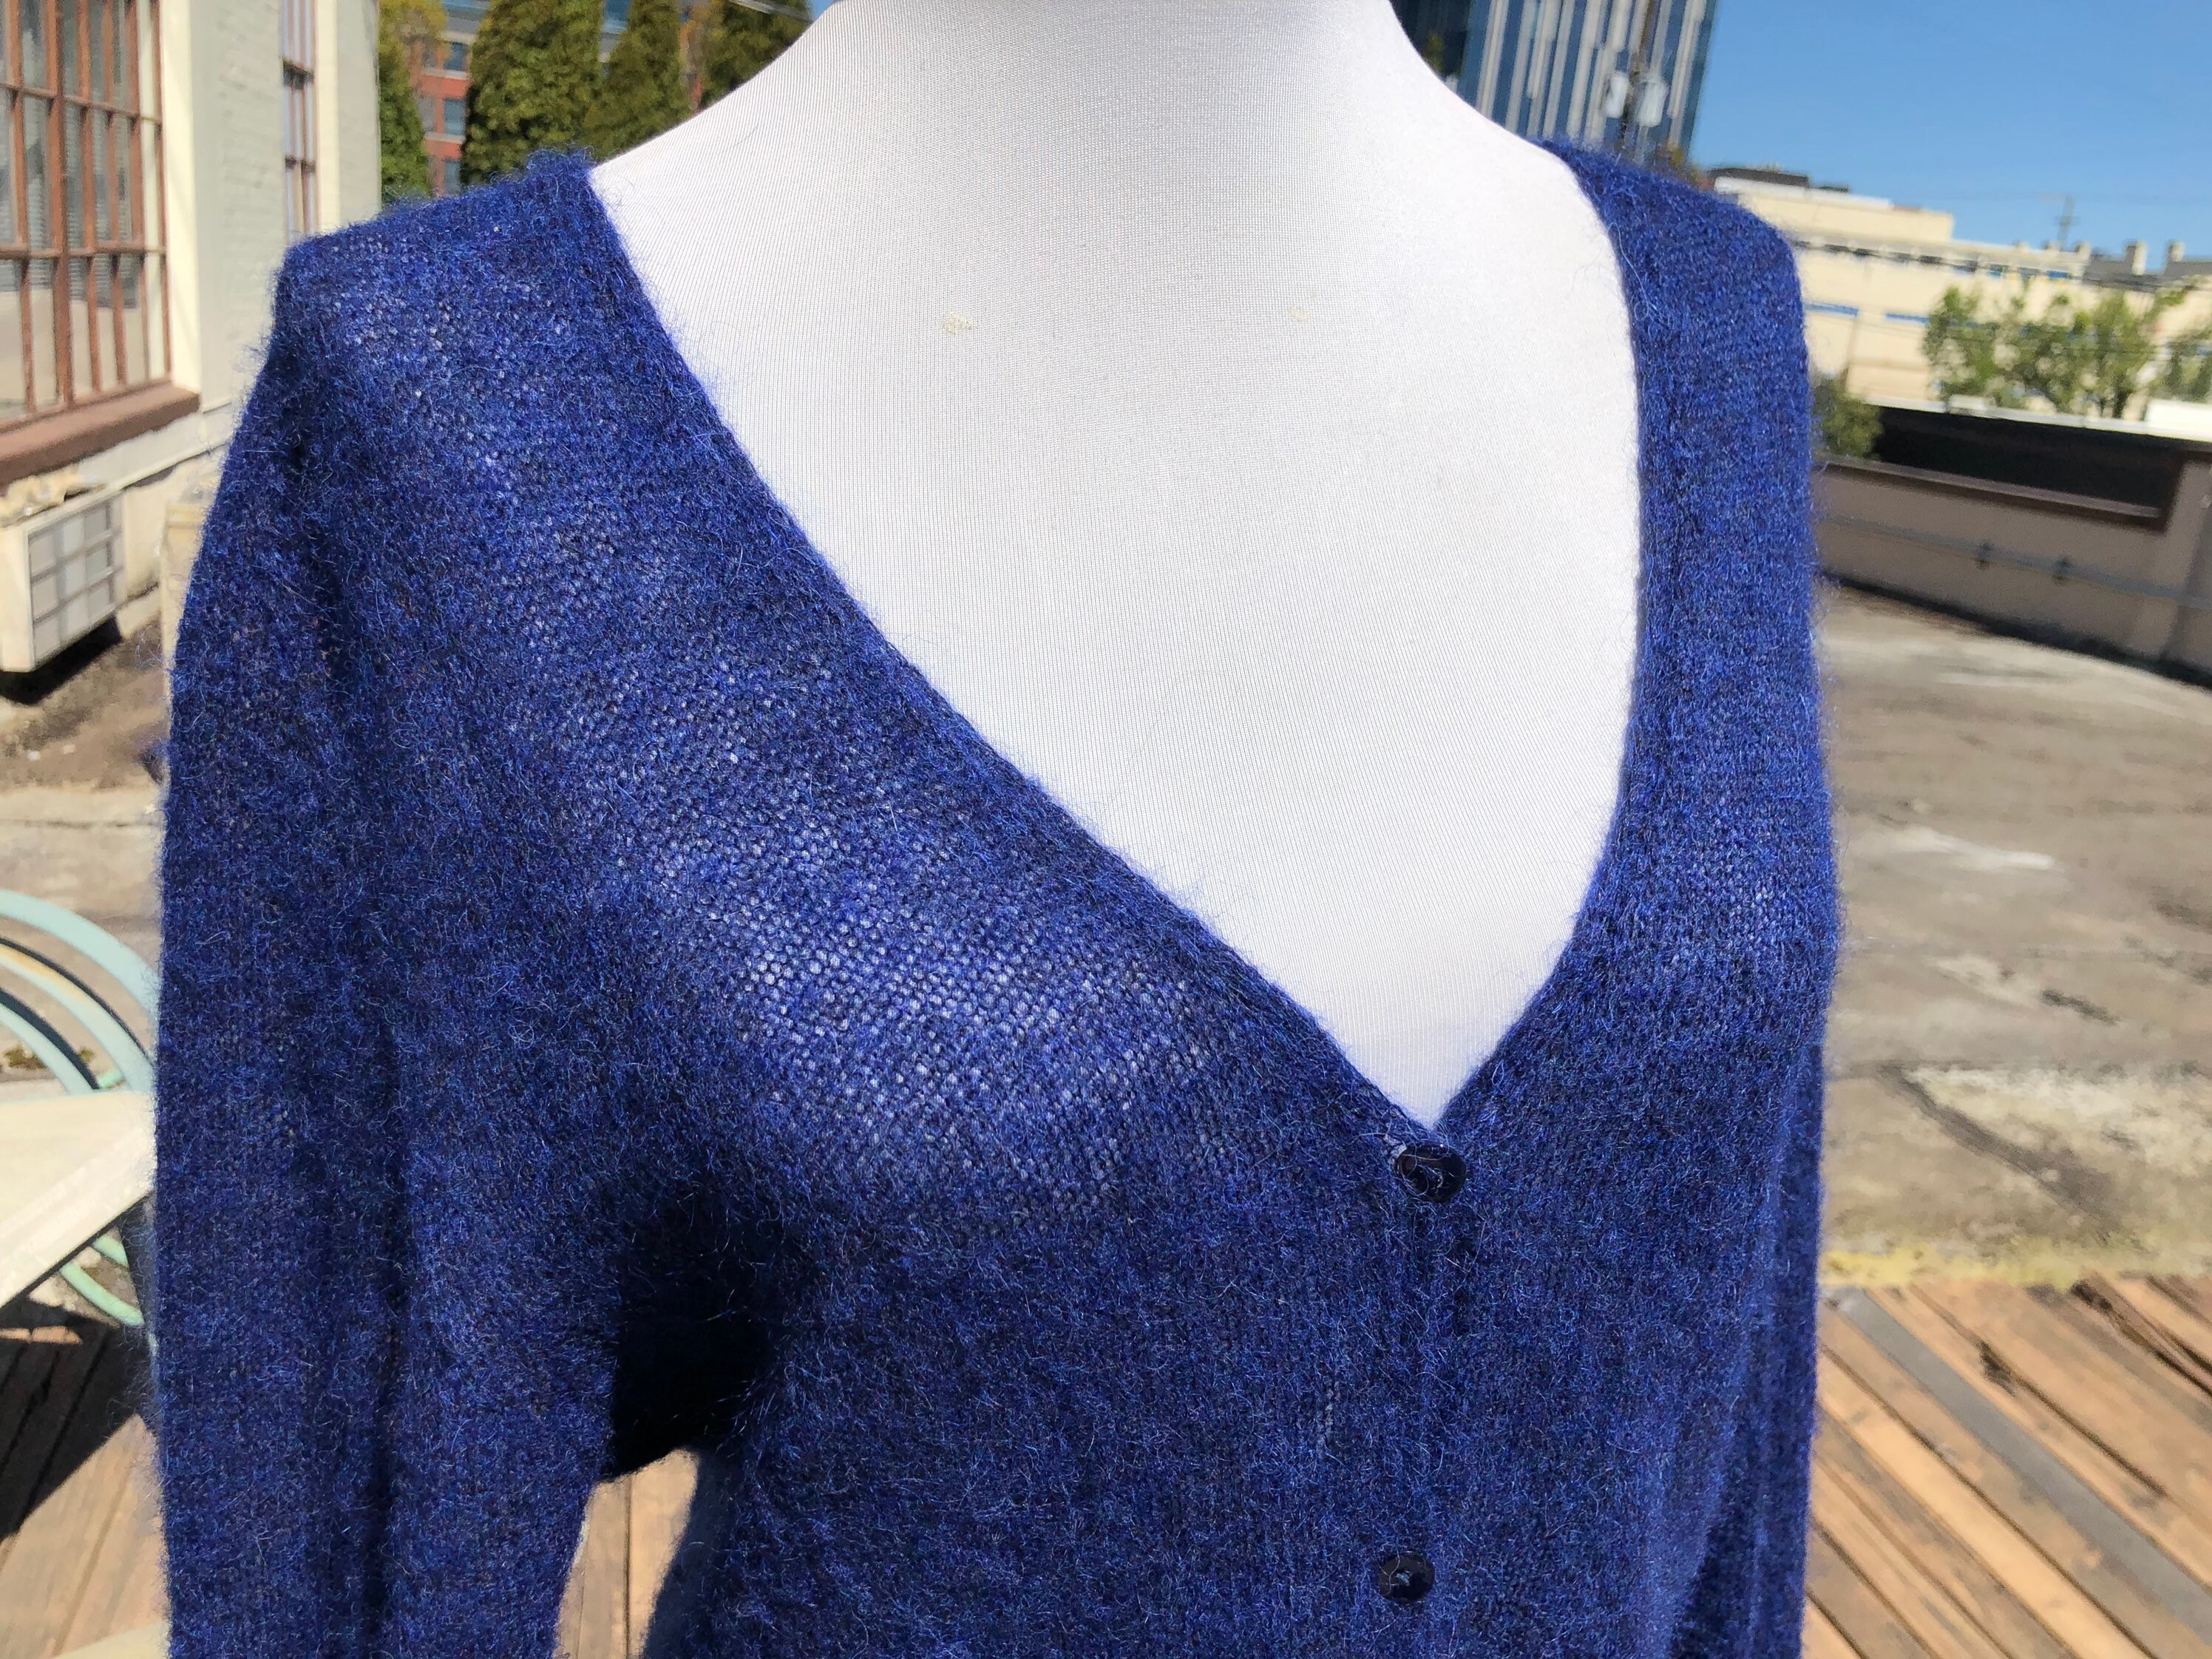 Alpaca Mohair Wool Blend Dark Sapphire Blue Sheer Open Thin Knit Button Up Deep V Neck Cardigan Cardi Sweater Sz S M Vintage Made in Italy